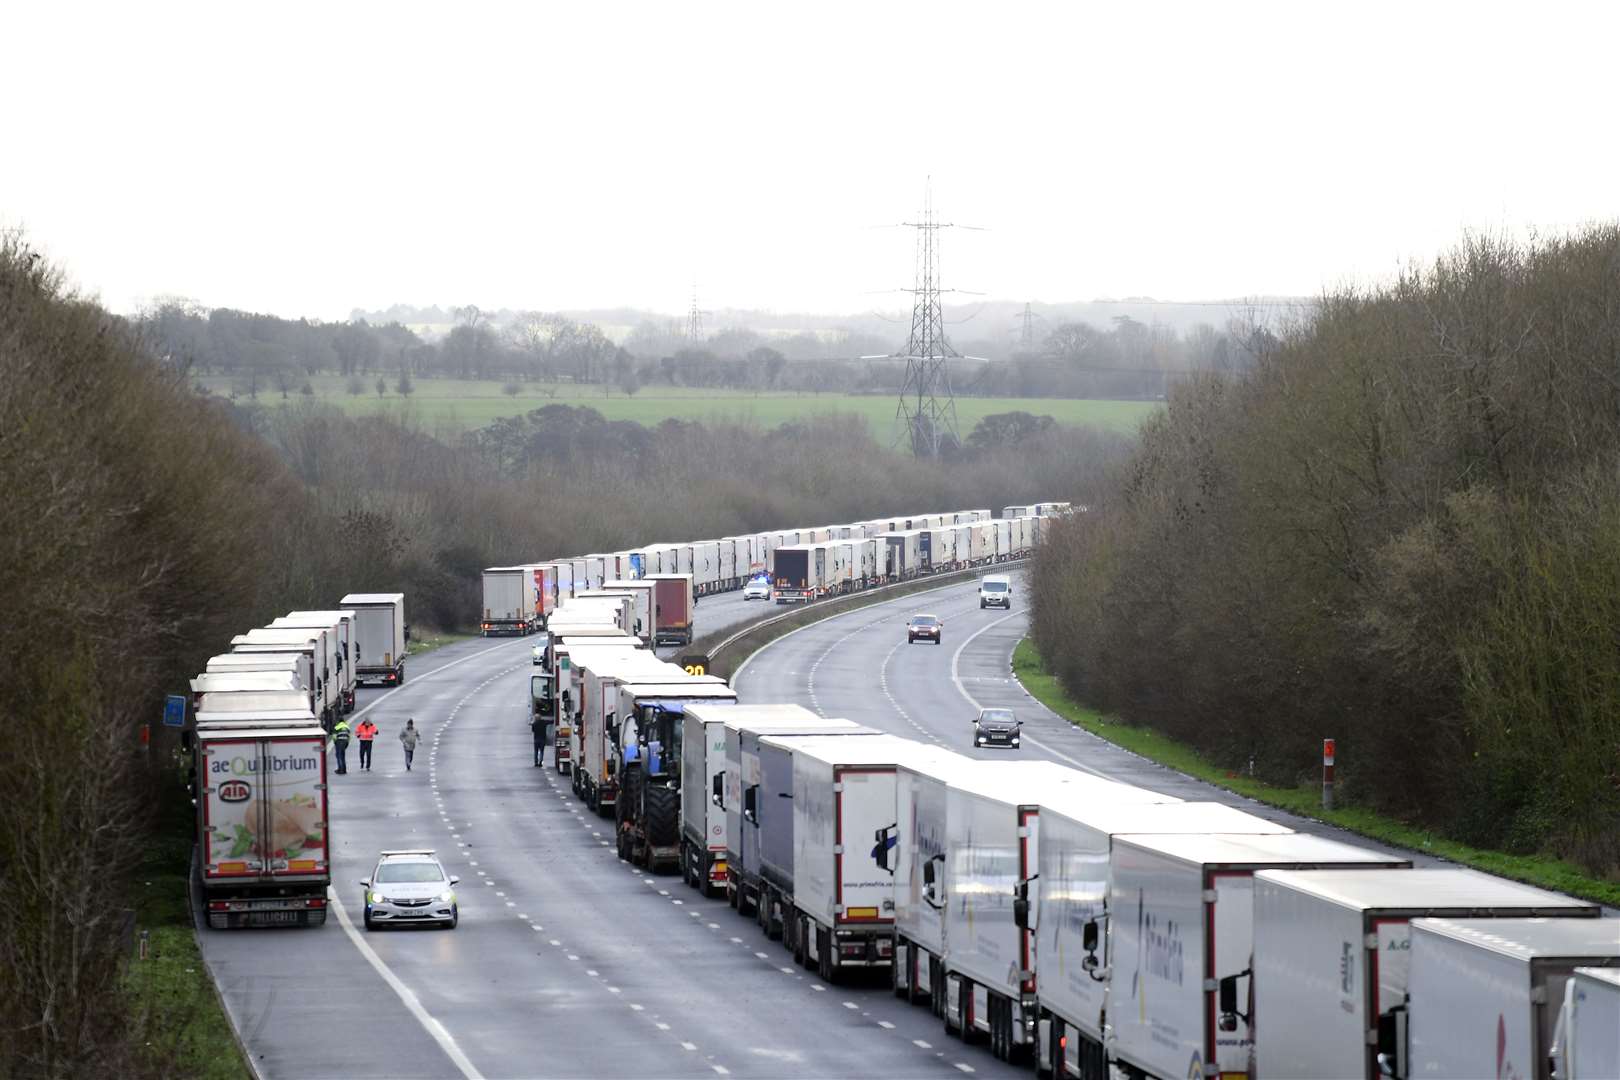 Lorries were queued up on the M20 when the border was closed just before Christmas. Picture: Barry Goodwin.